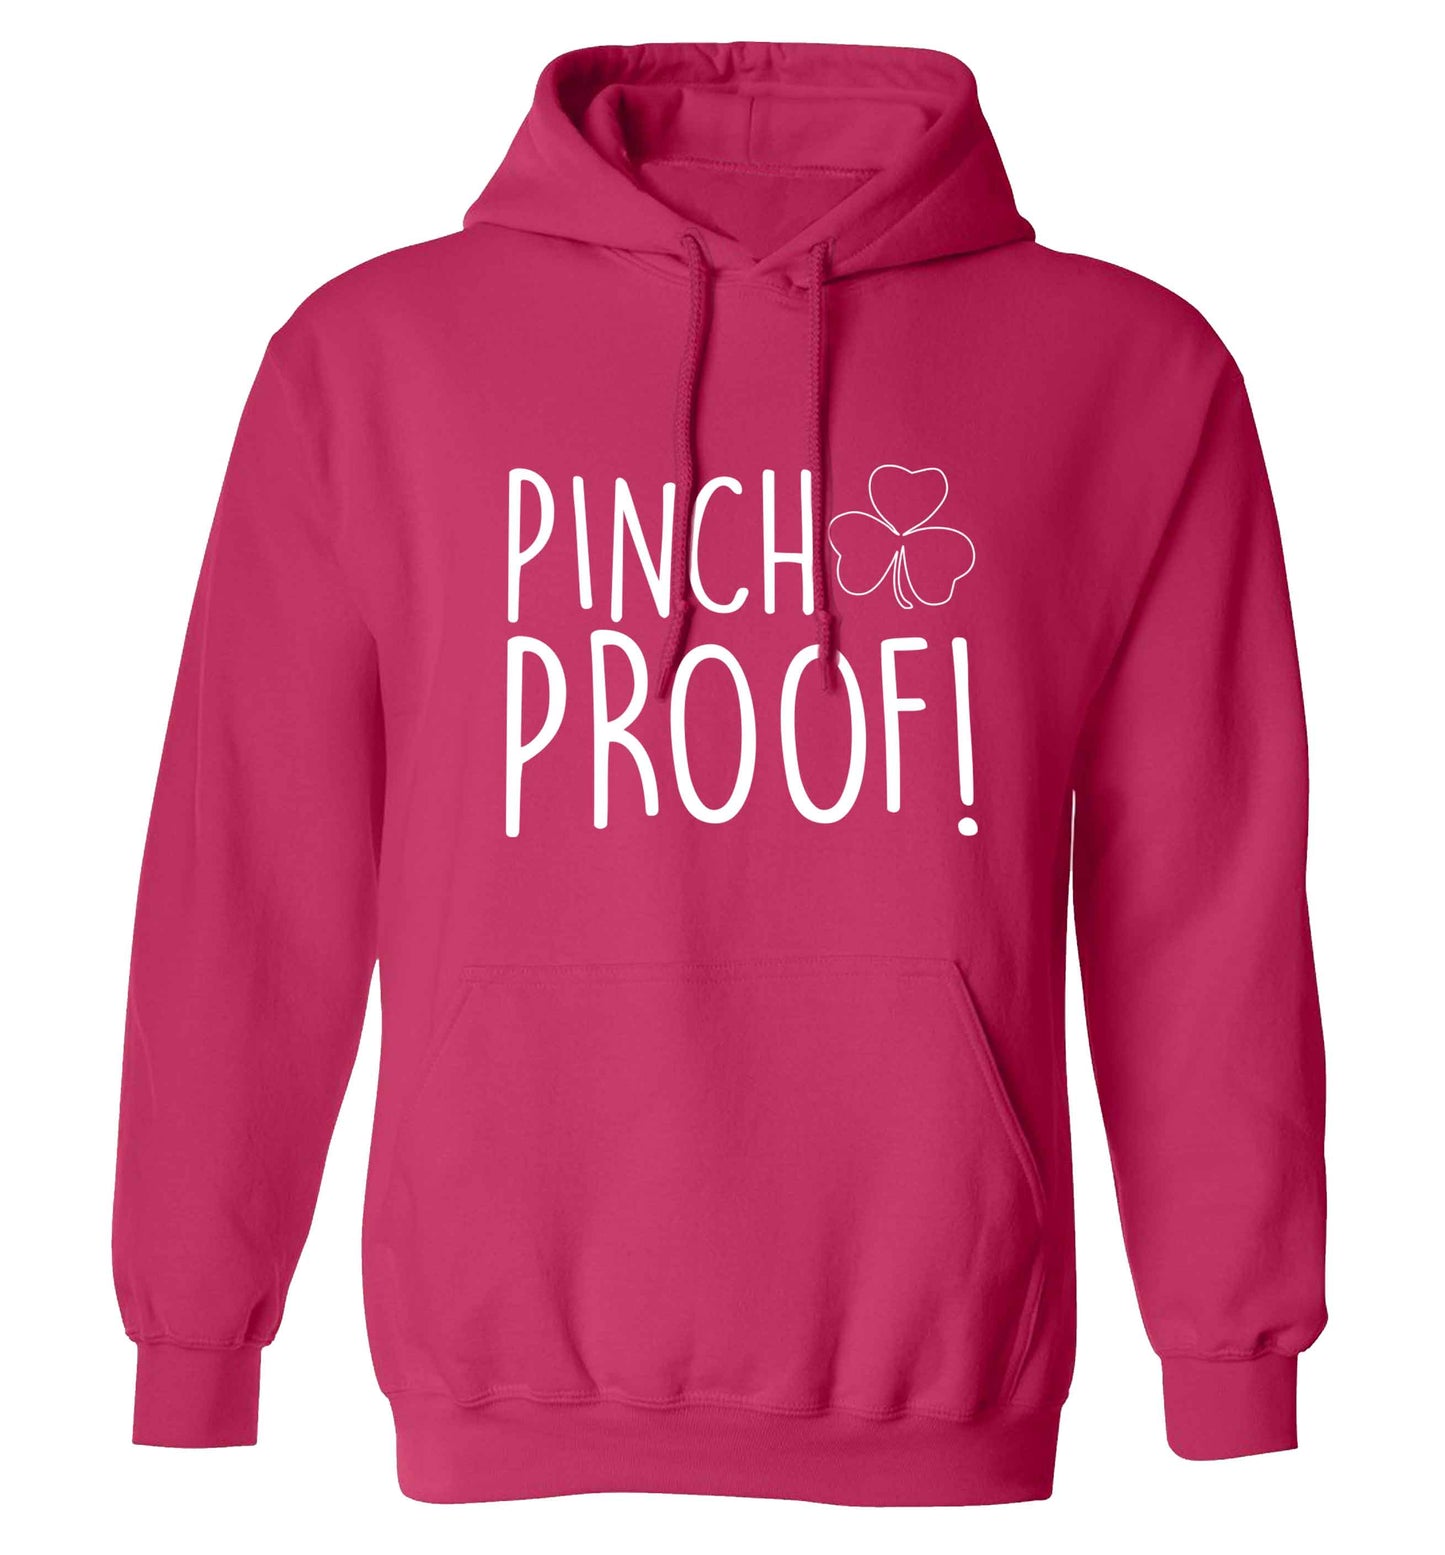 Pinch Proof adults unisex pink hoodie 2XL